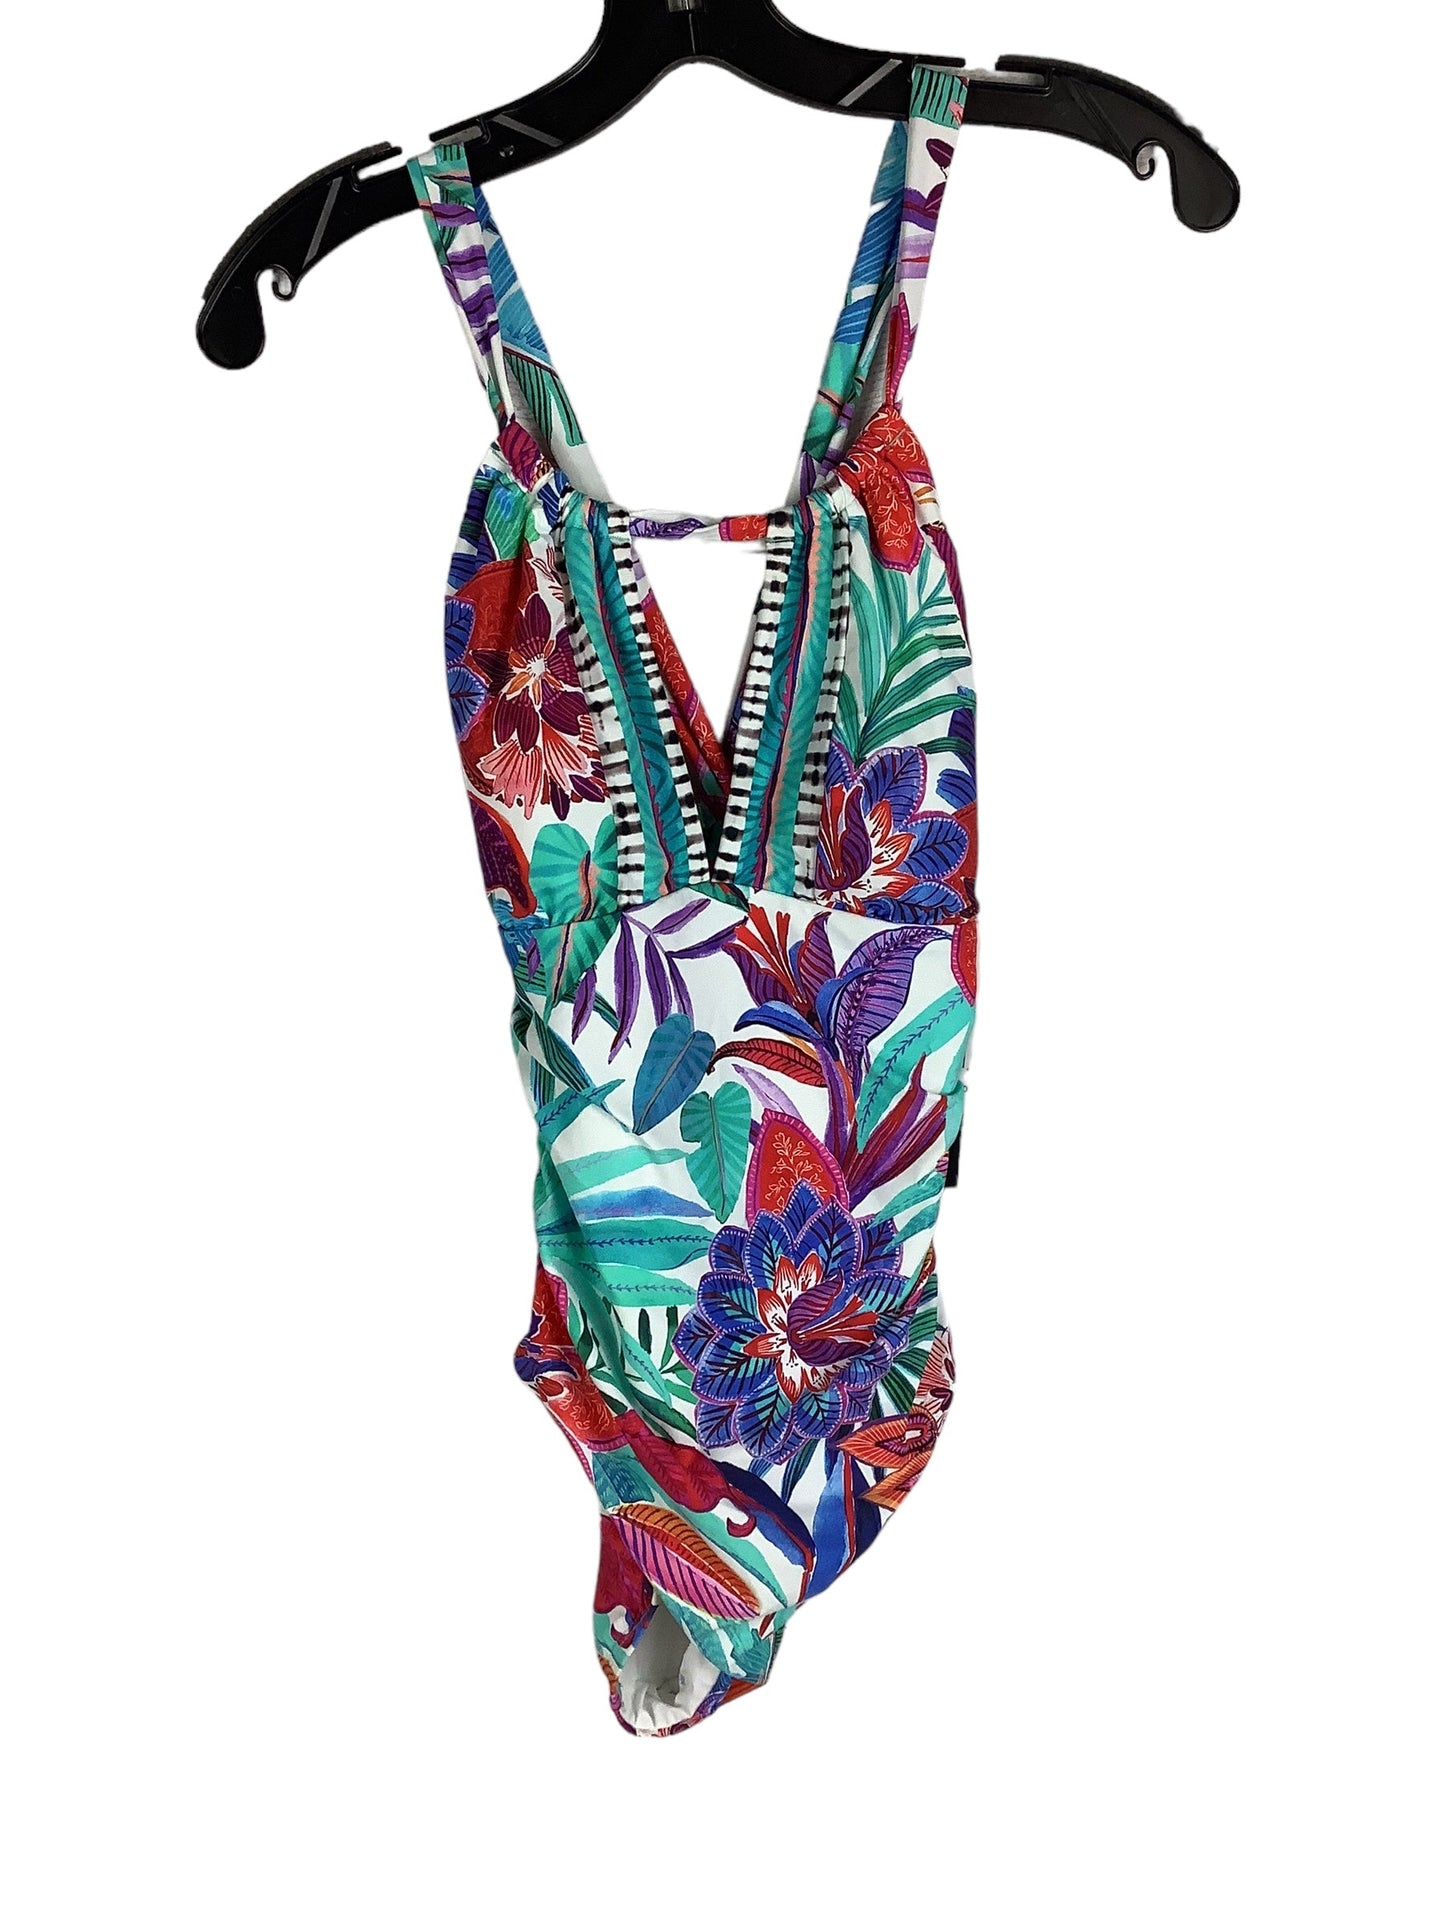 Multi-colored Swimsuit Clothes Mentor, Size 4